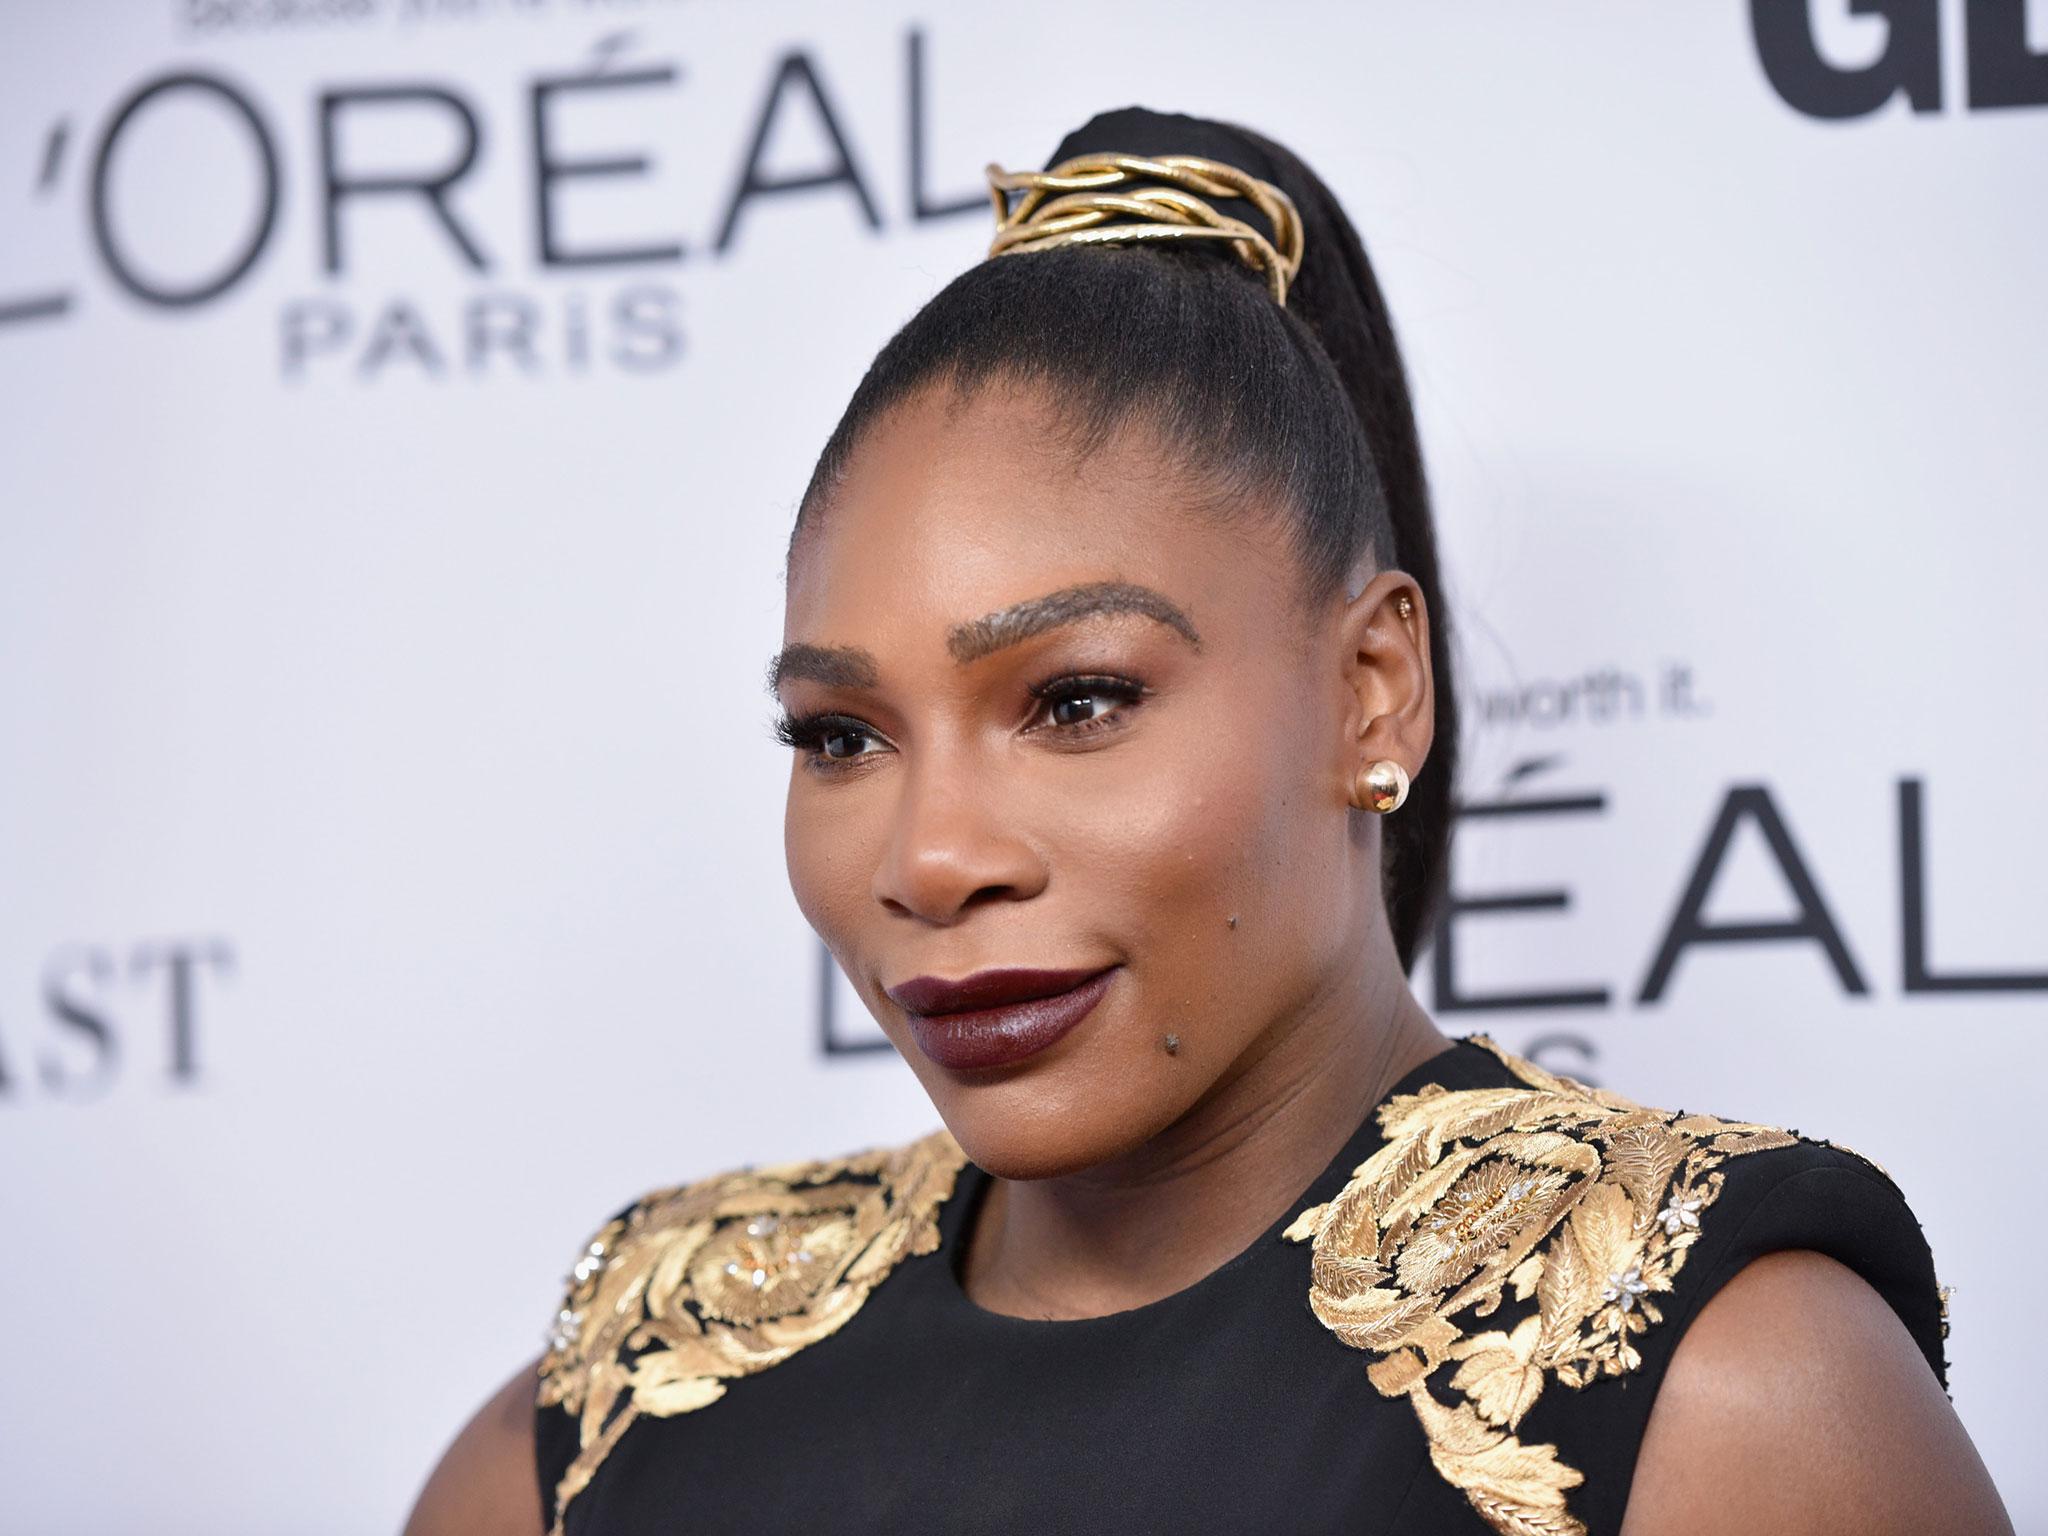 Serena Williams is working towards a return for the 2018 season